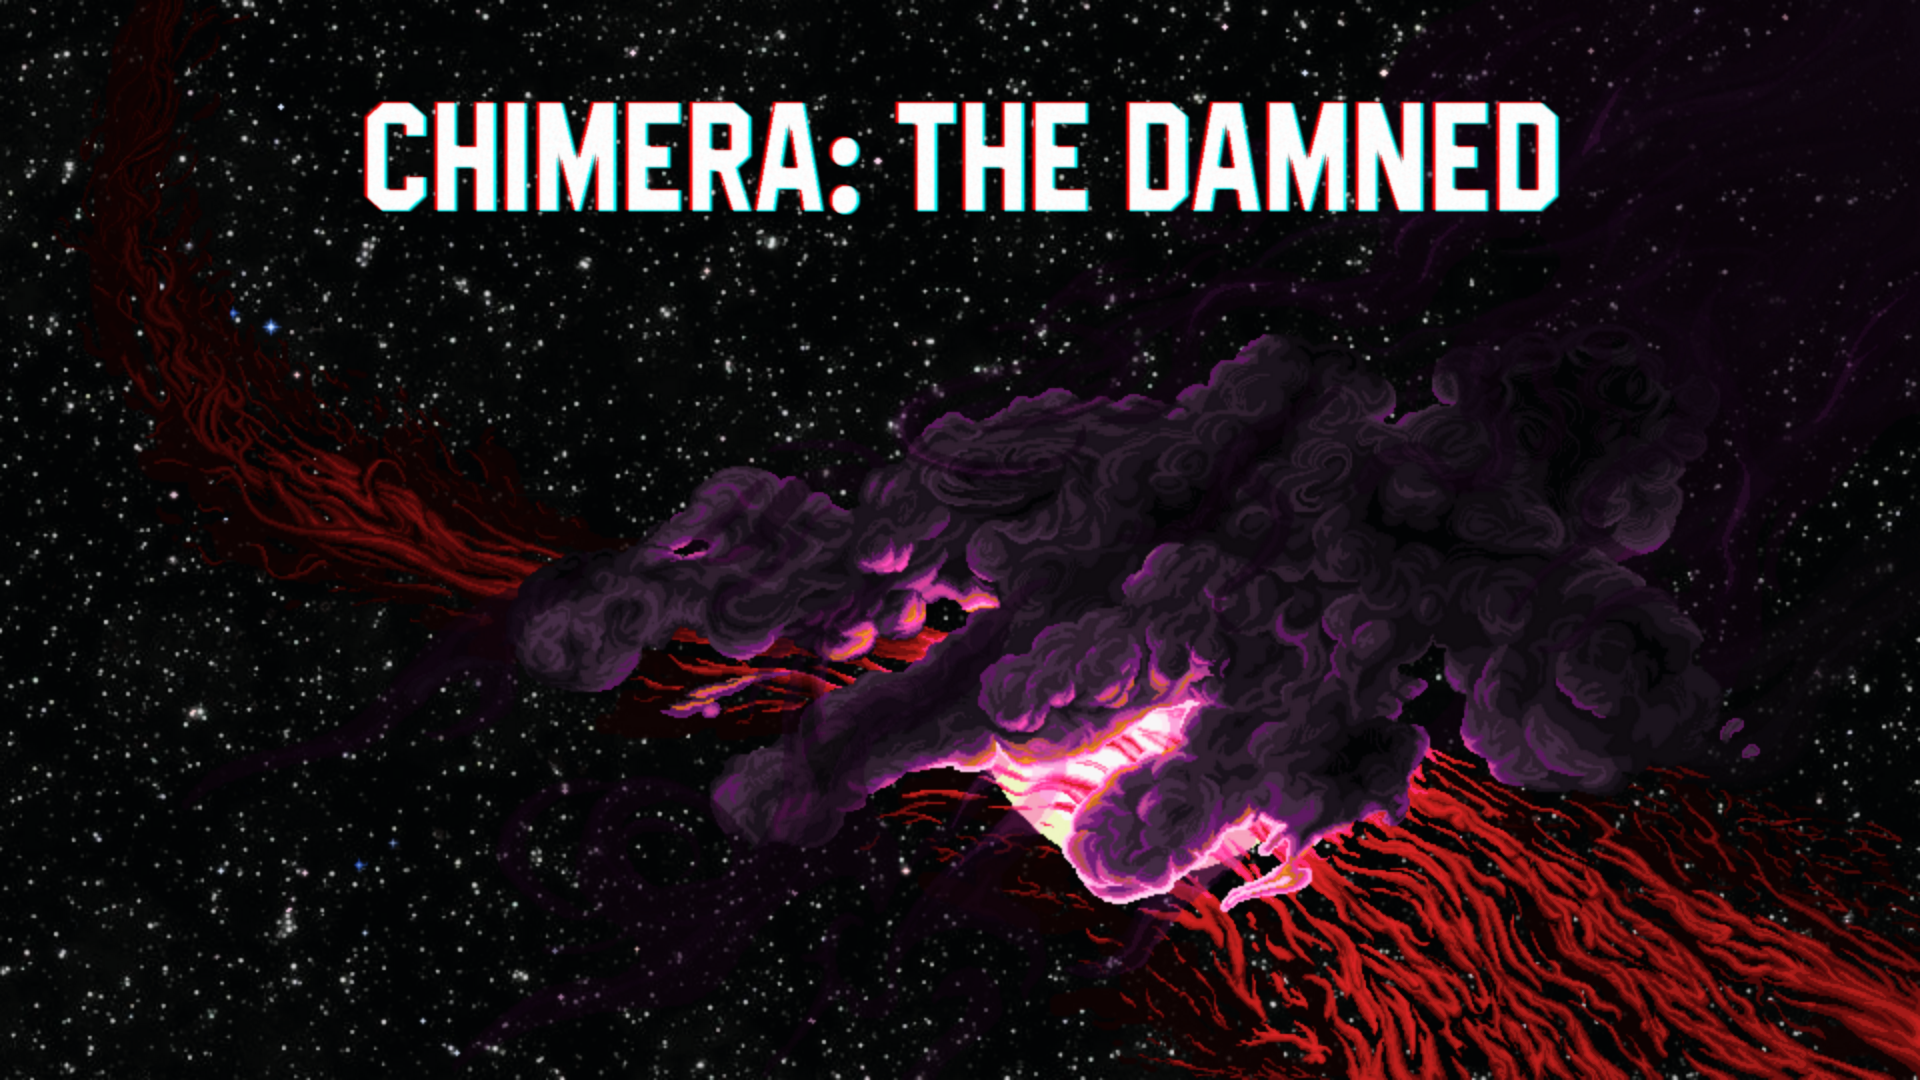 CHIMERA: THE DAMNED